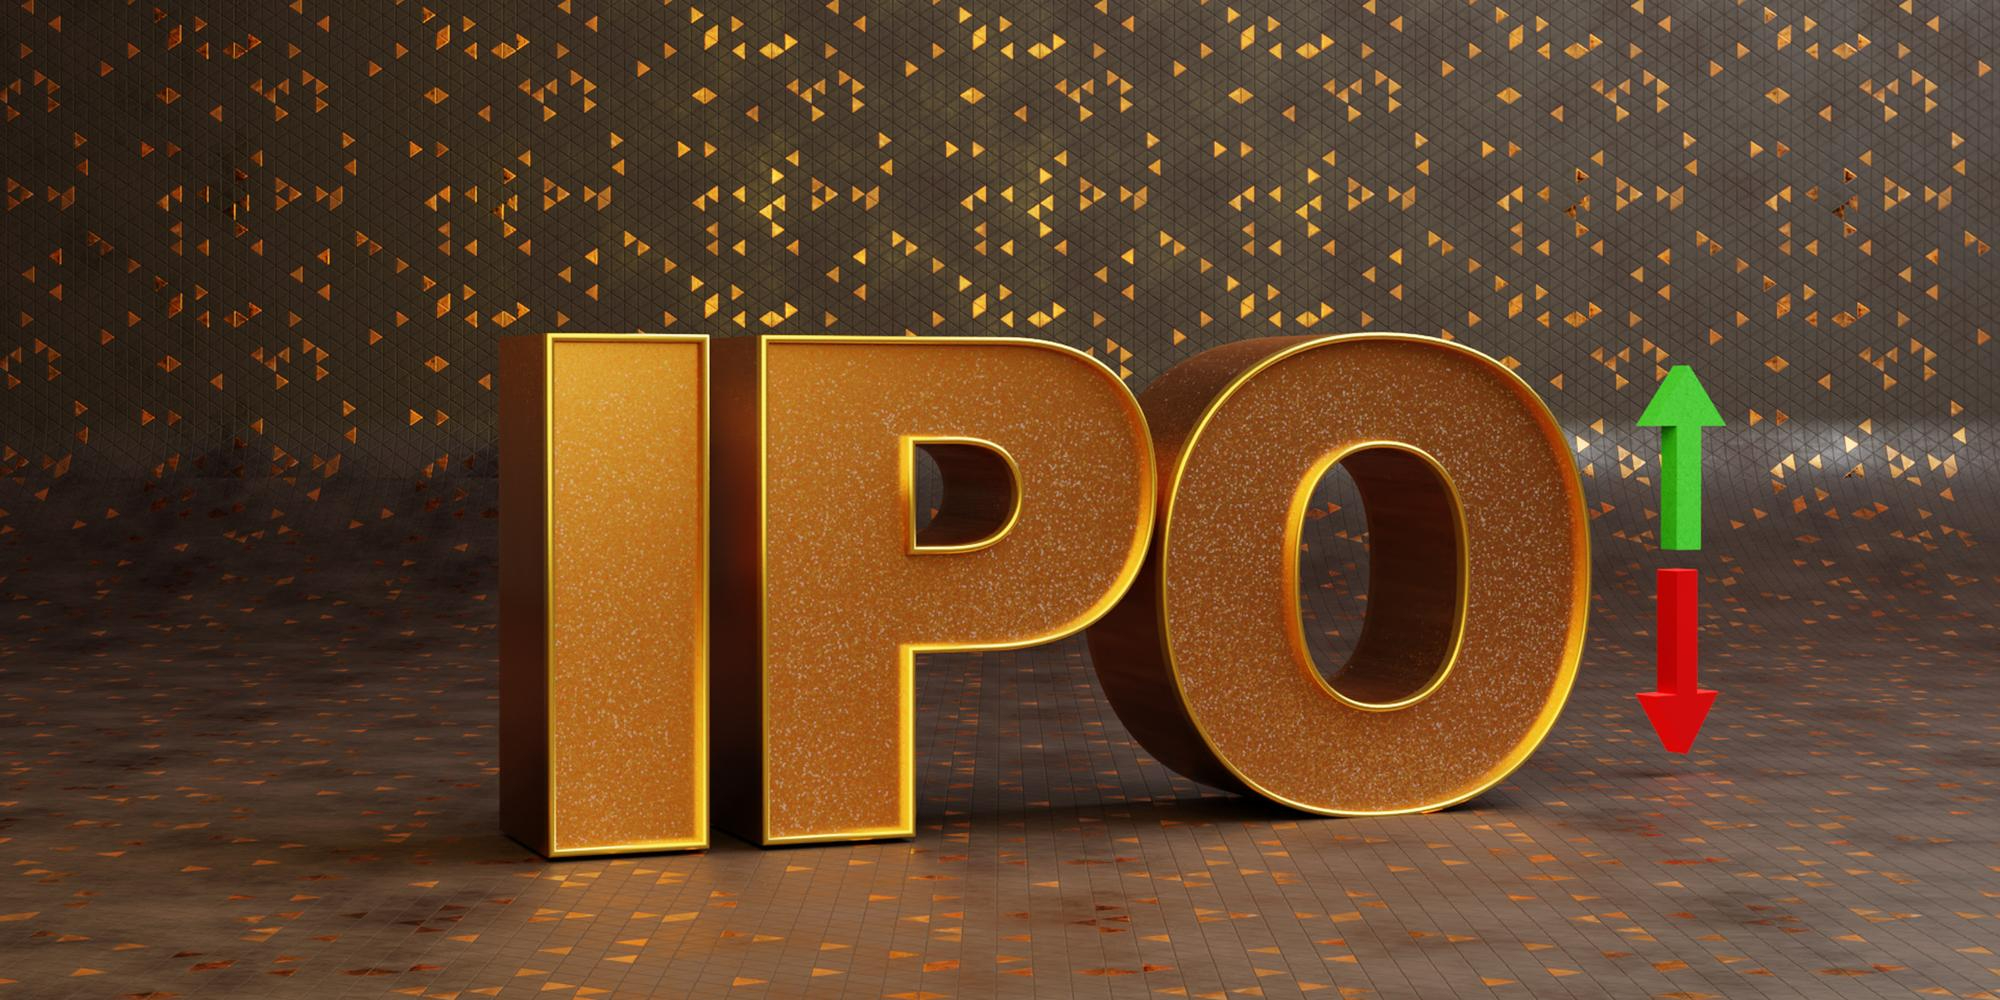 akums-pharma-sets-for-inr-1-750-cr-ipo-on-july-30